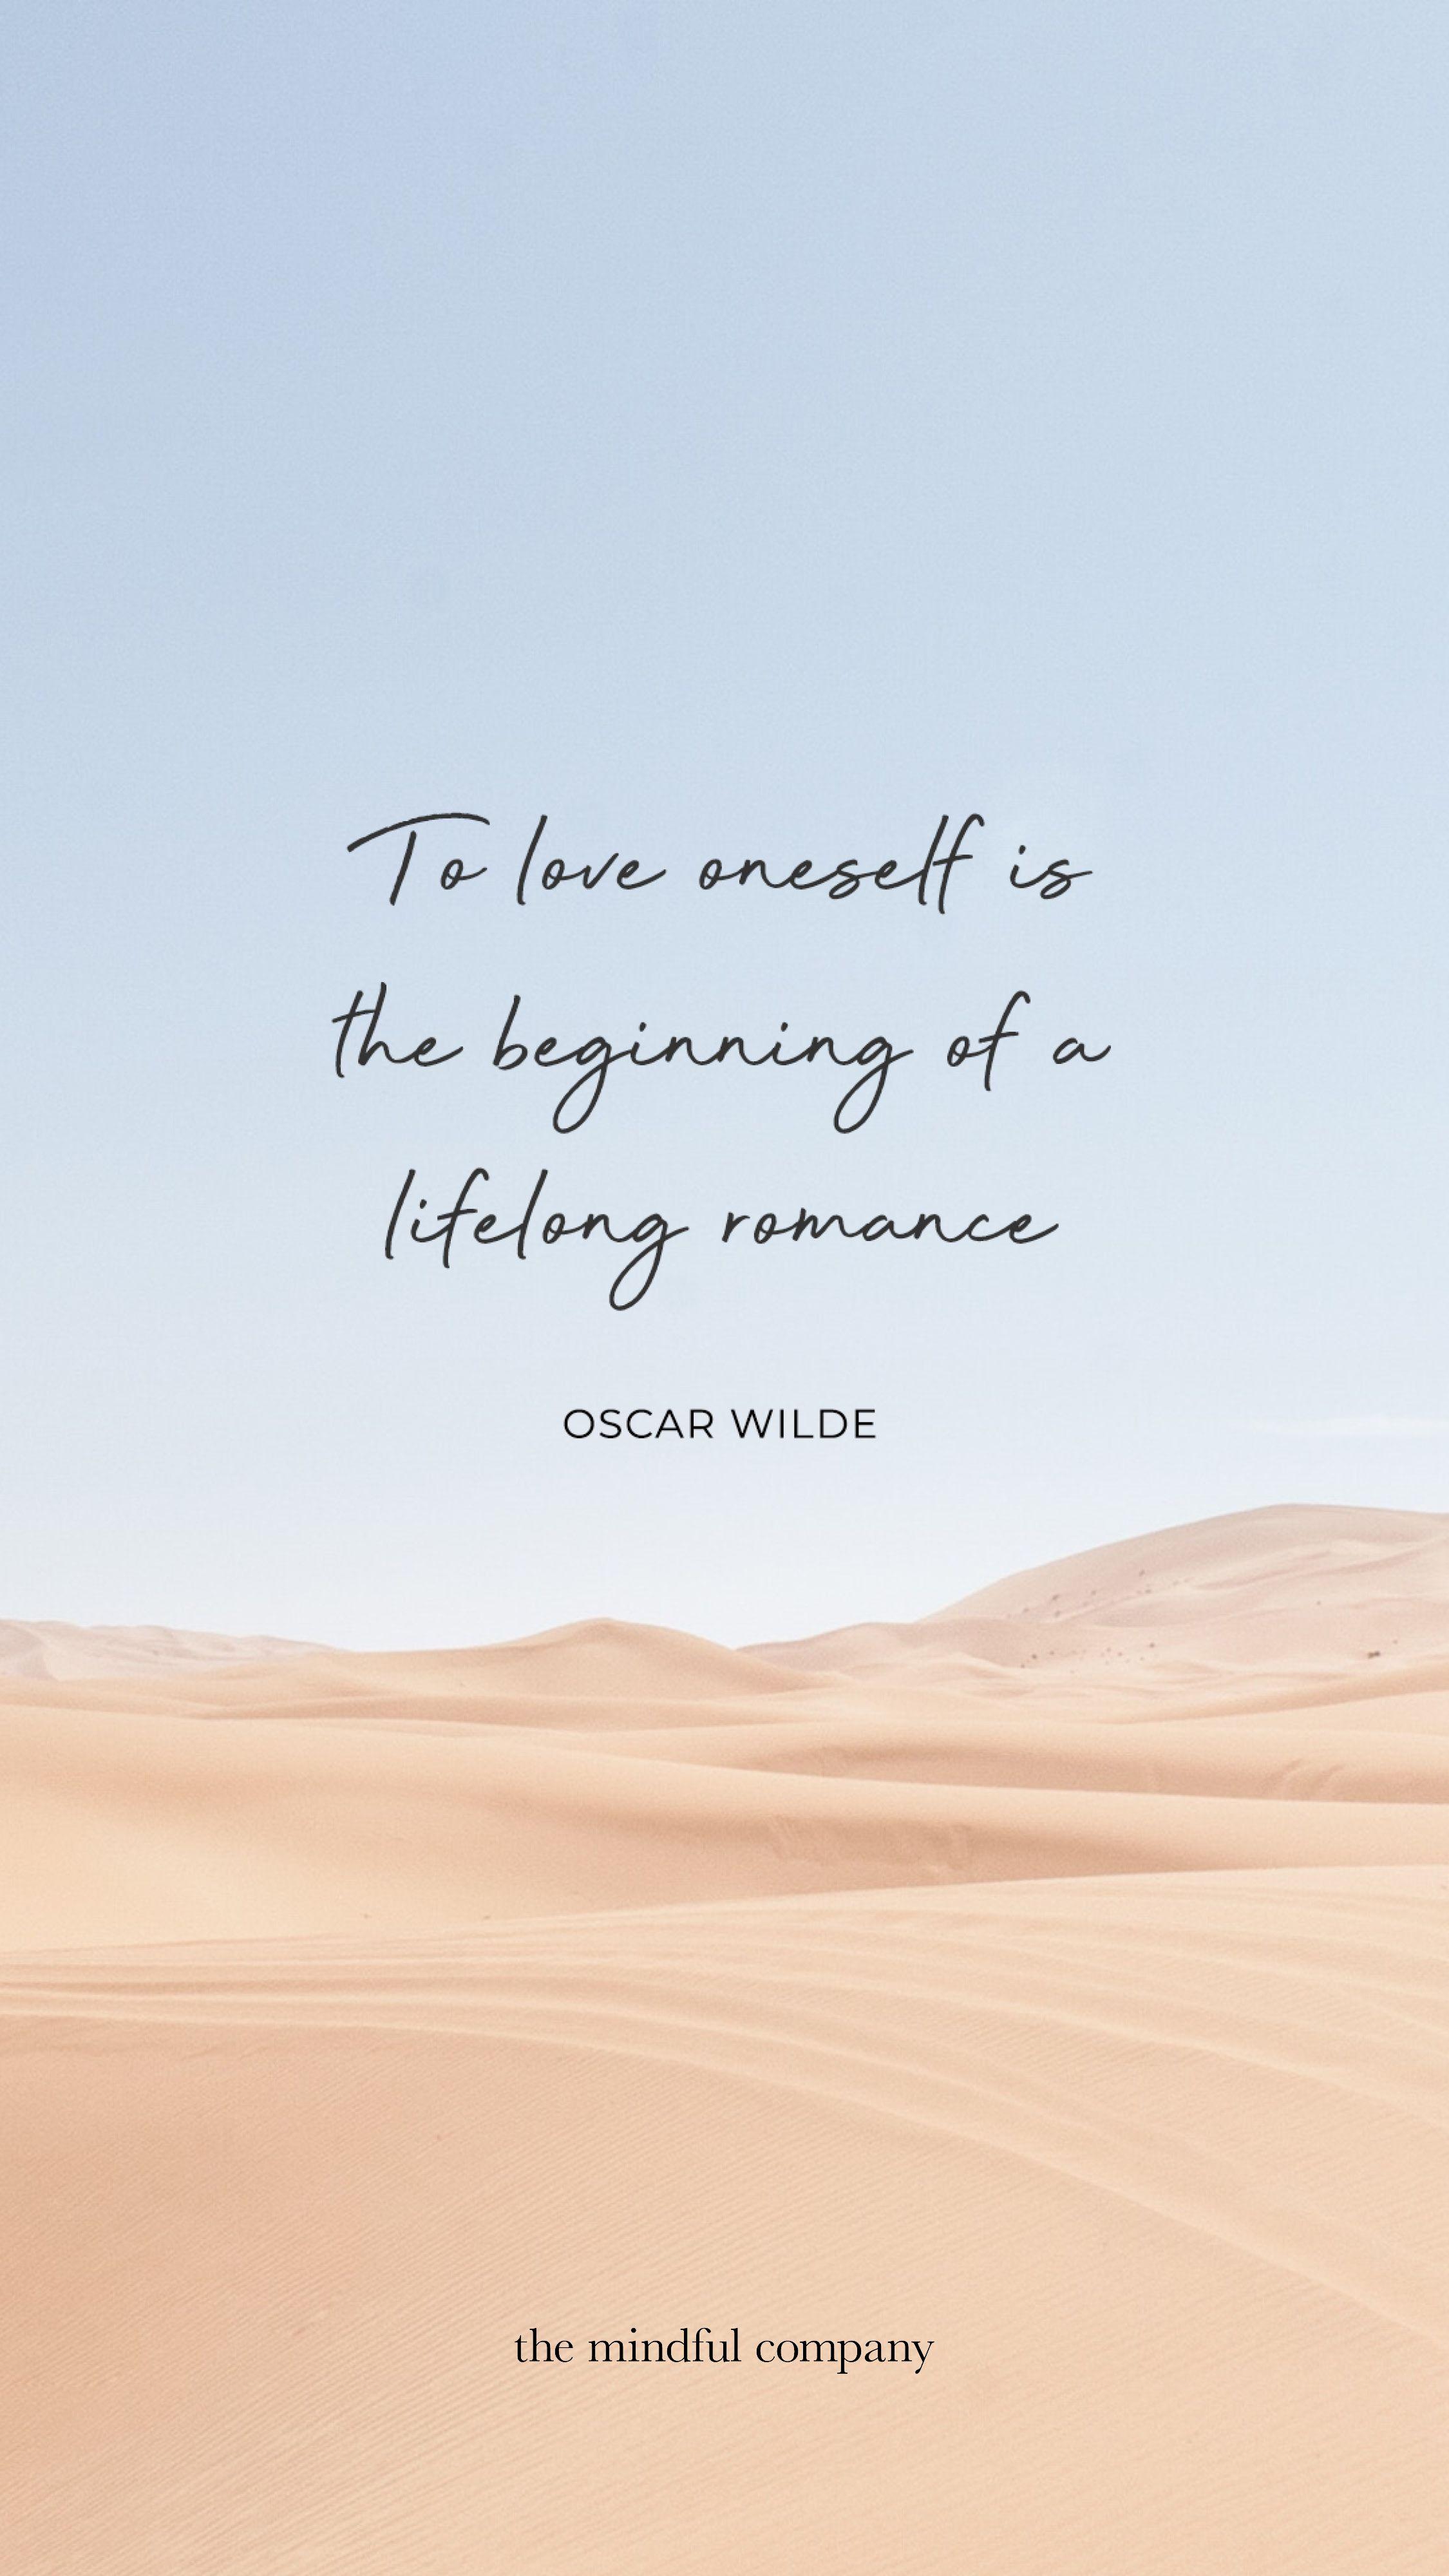 Something is brewing. Lines quotes, Oscar wilde, Morning greetings quotes